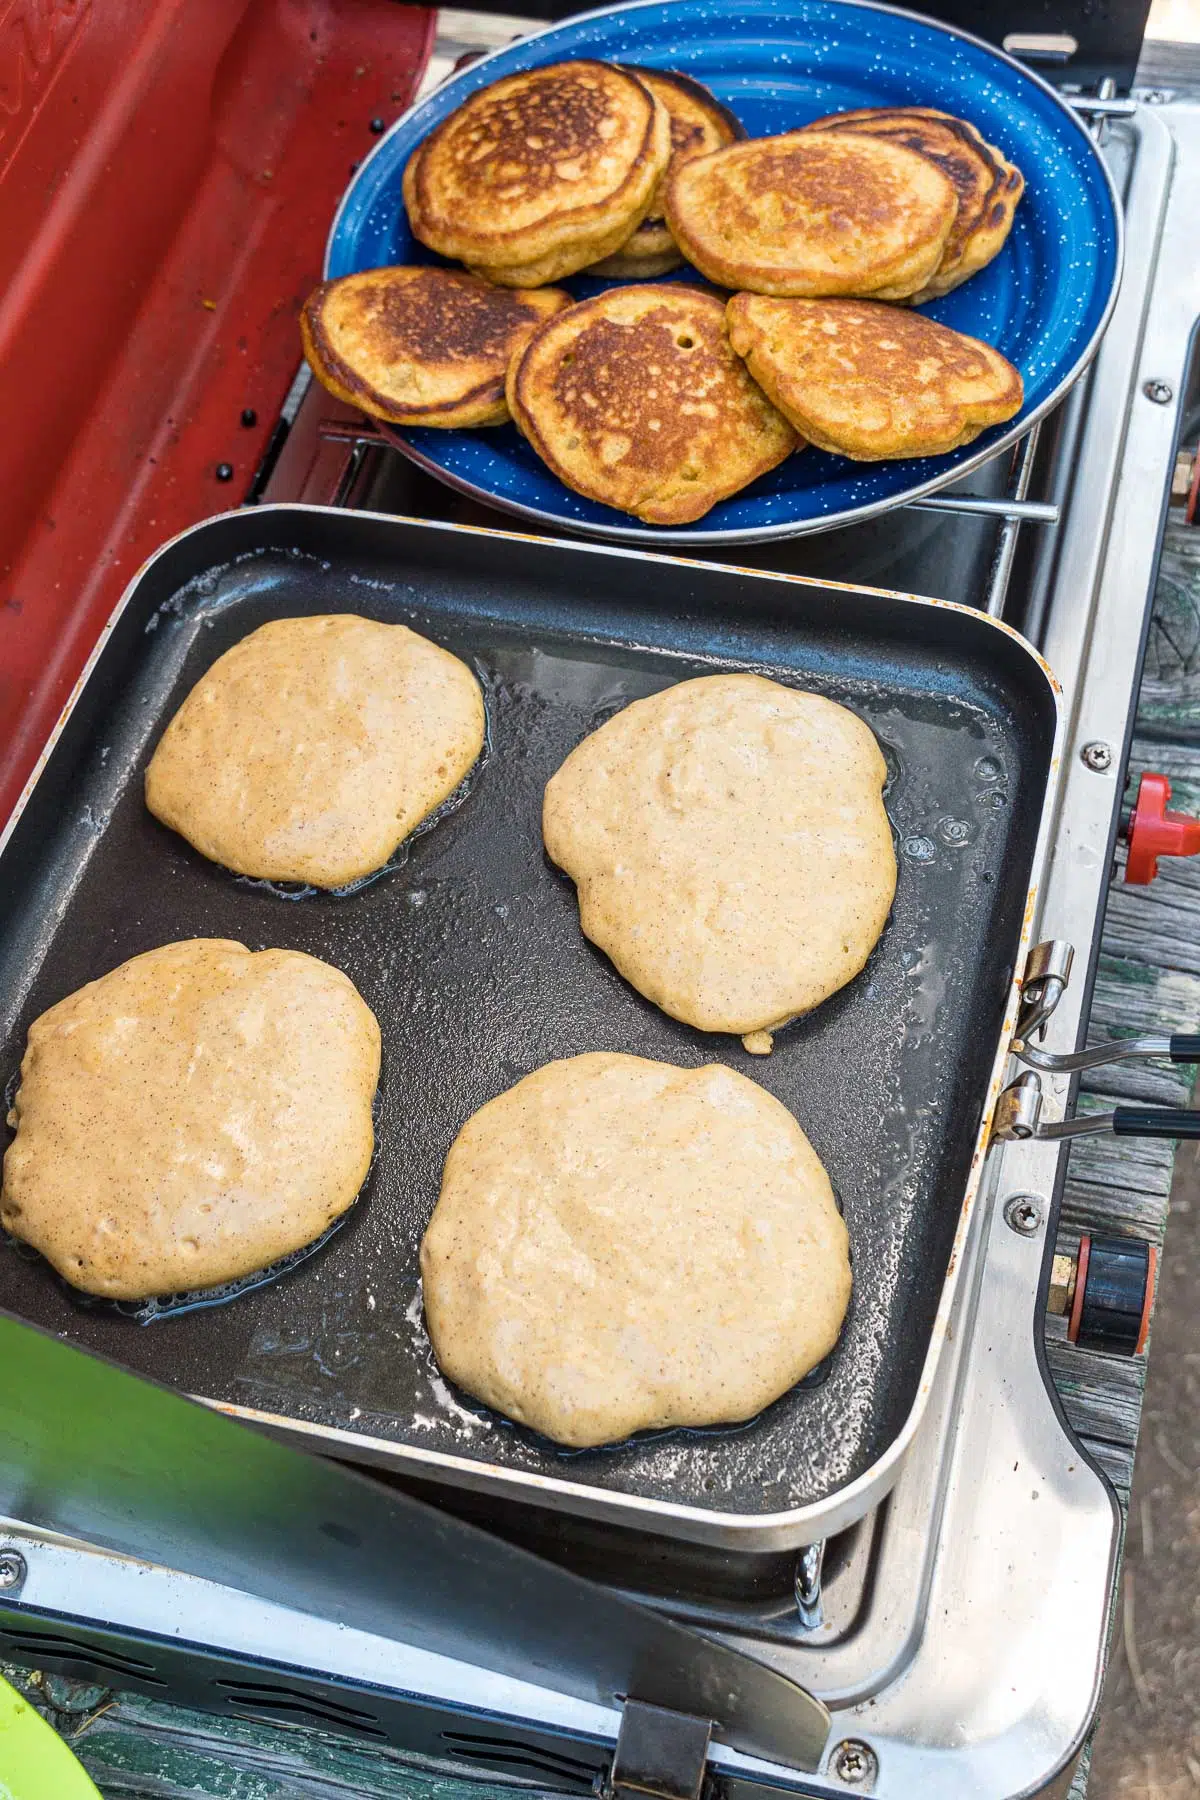 Four pancakes cooking on a square frying pan.